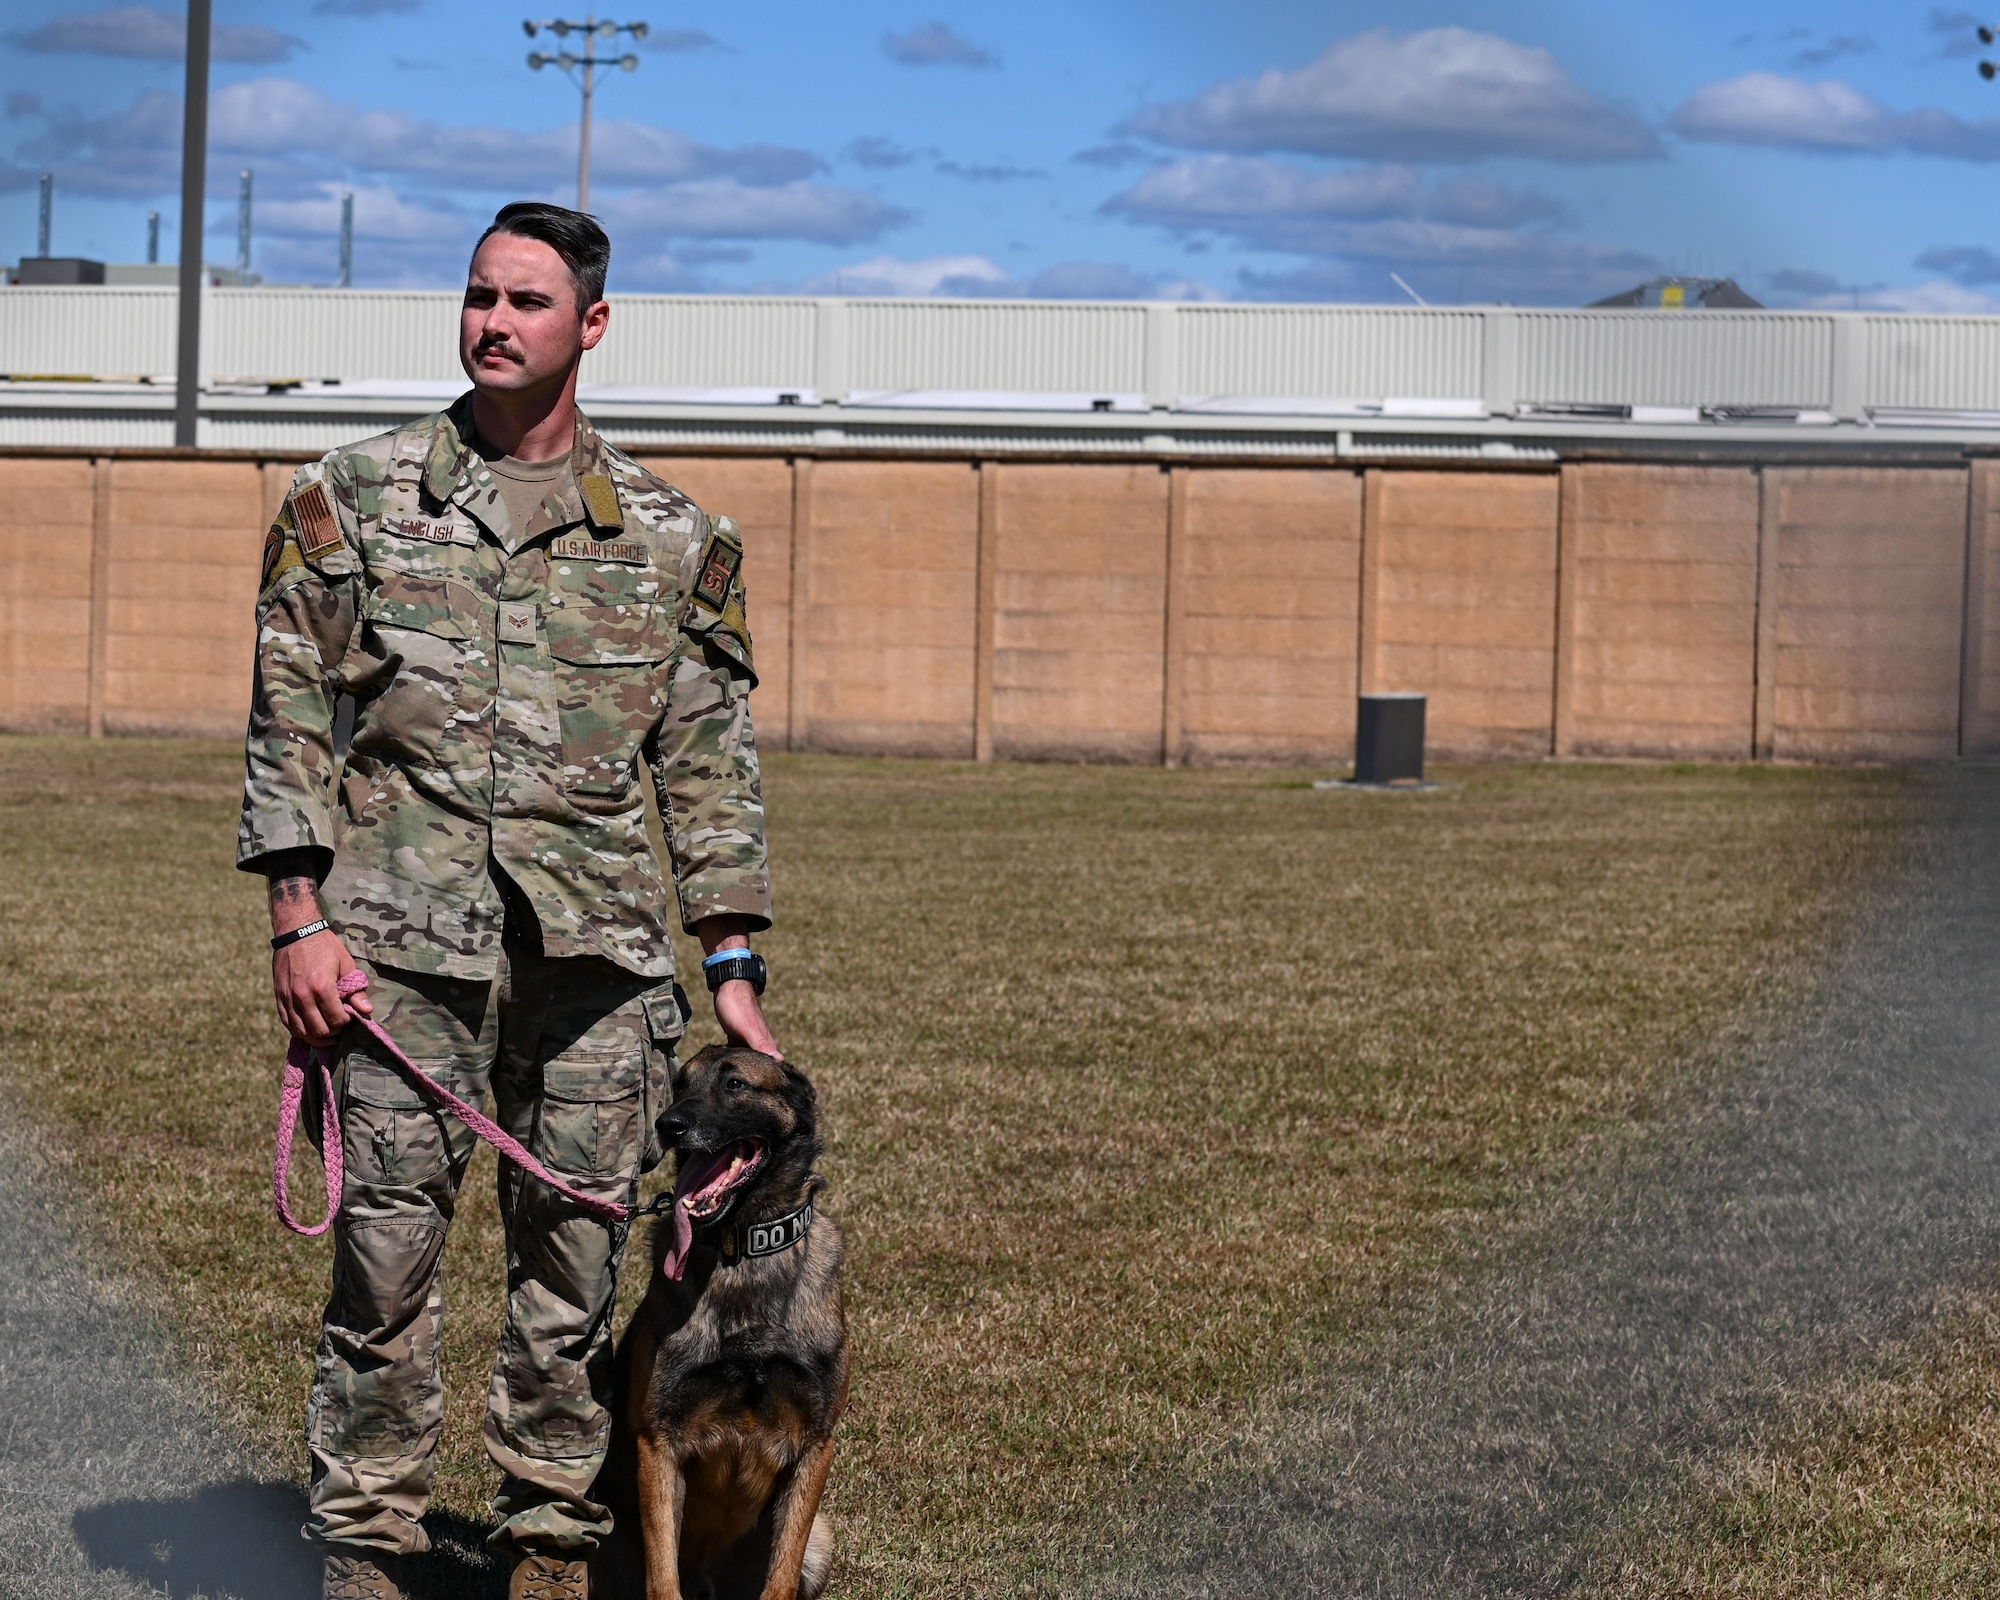 SrA Colin English 14th SFS K-9 Handler stands by K-9 Dalton during a dog bite demo at Columbus Air Force Base, MS, Oct. 16, 2023. The K-9s are trained to await commands from their handlers. (U.S. Air Force photo by A1C Jessica Blocher)